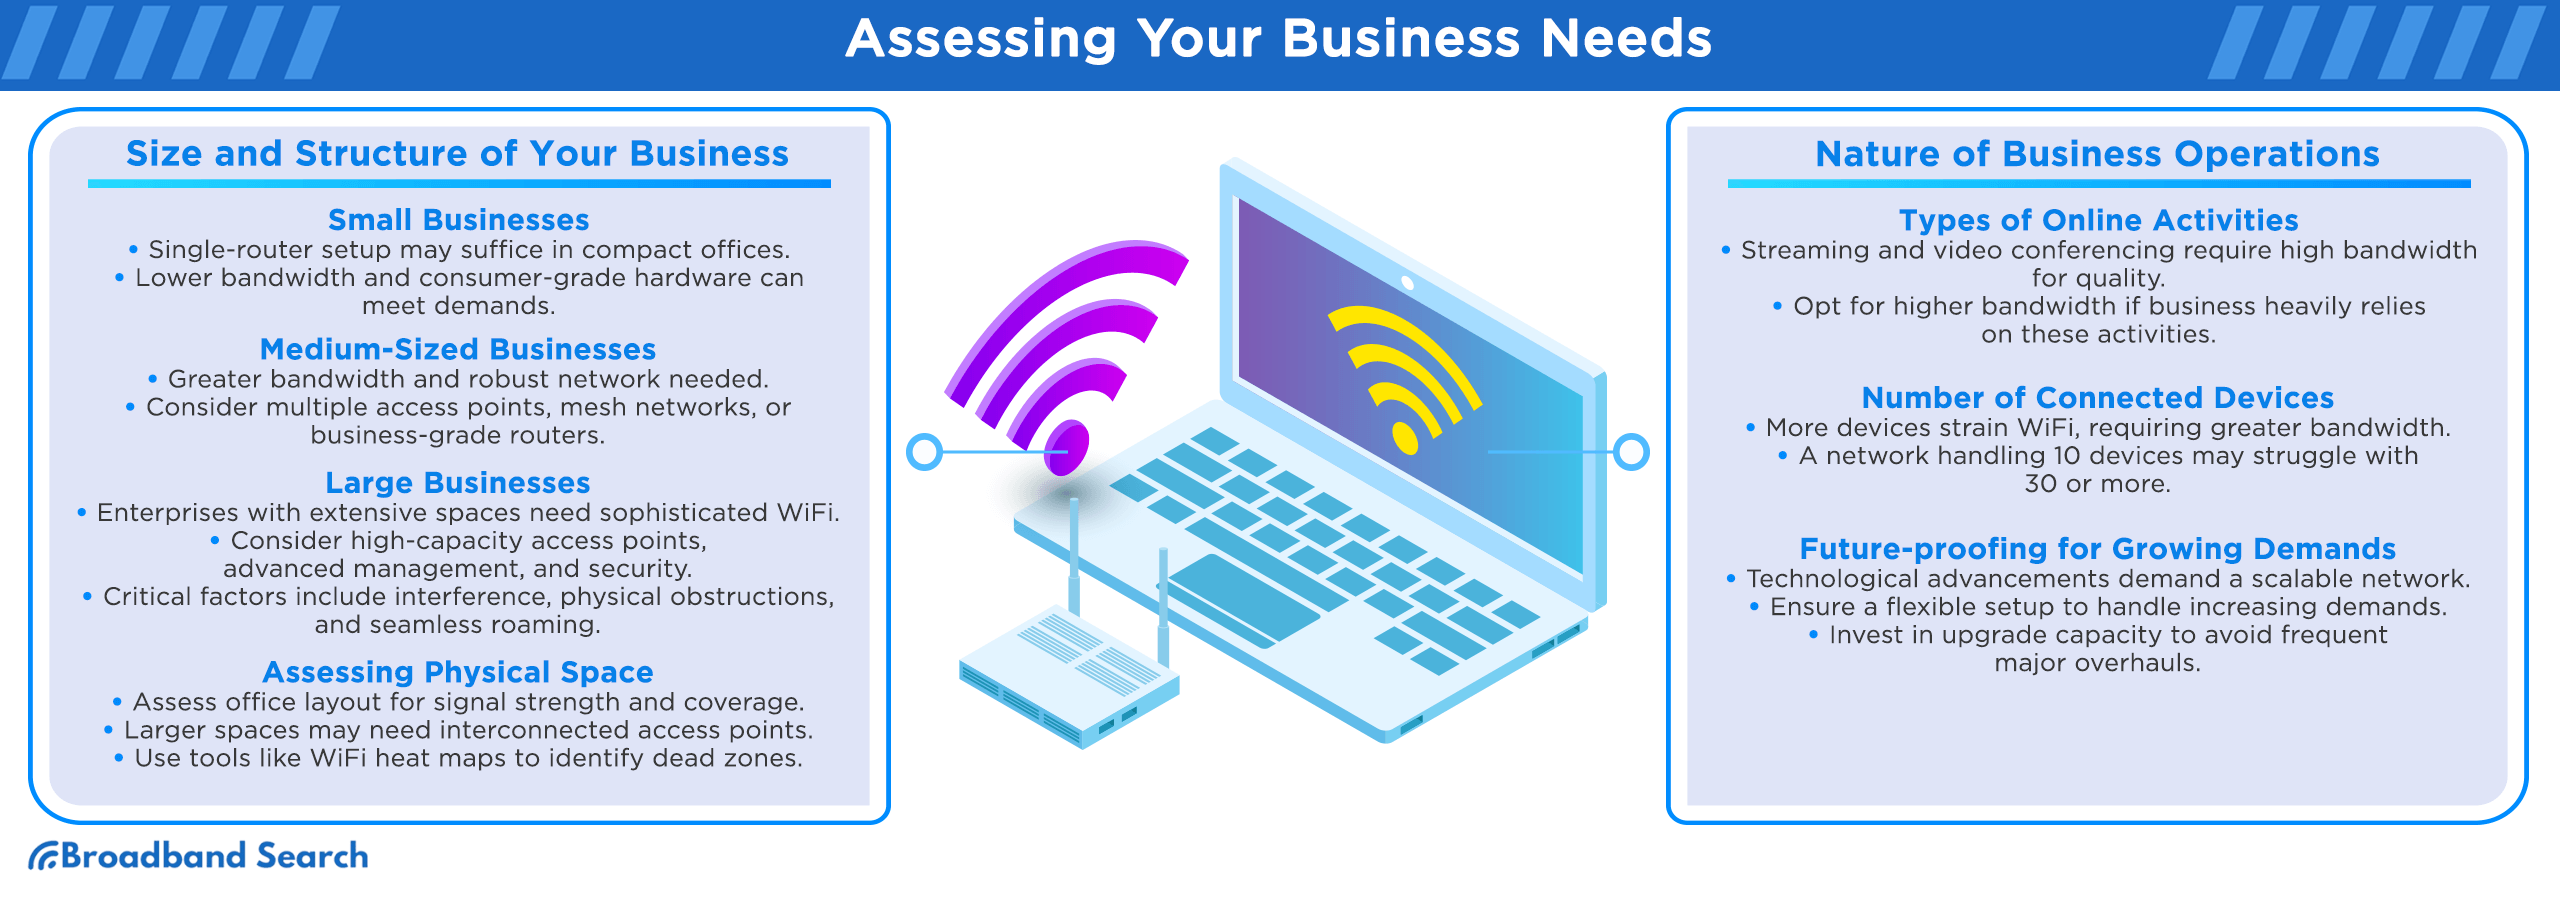 Assessing your business needs based on size, structure, and nature of business operations